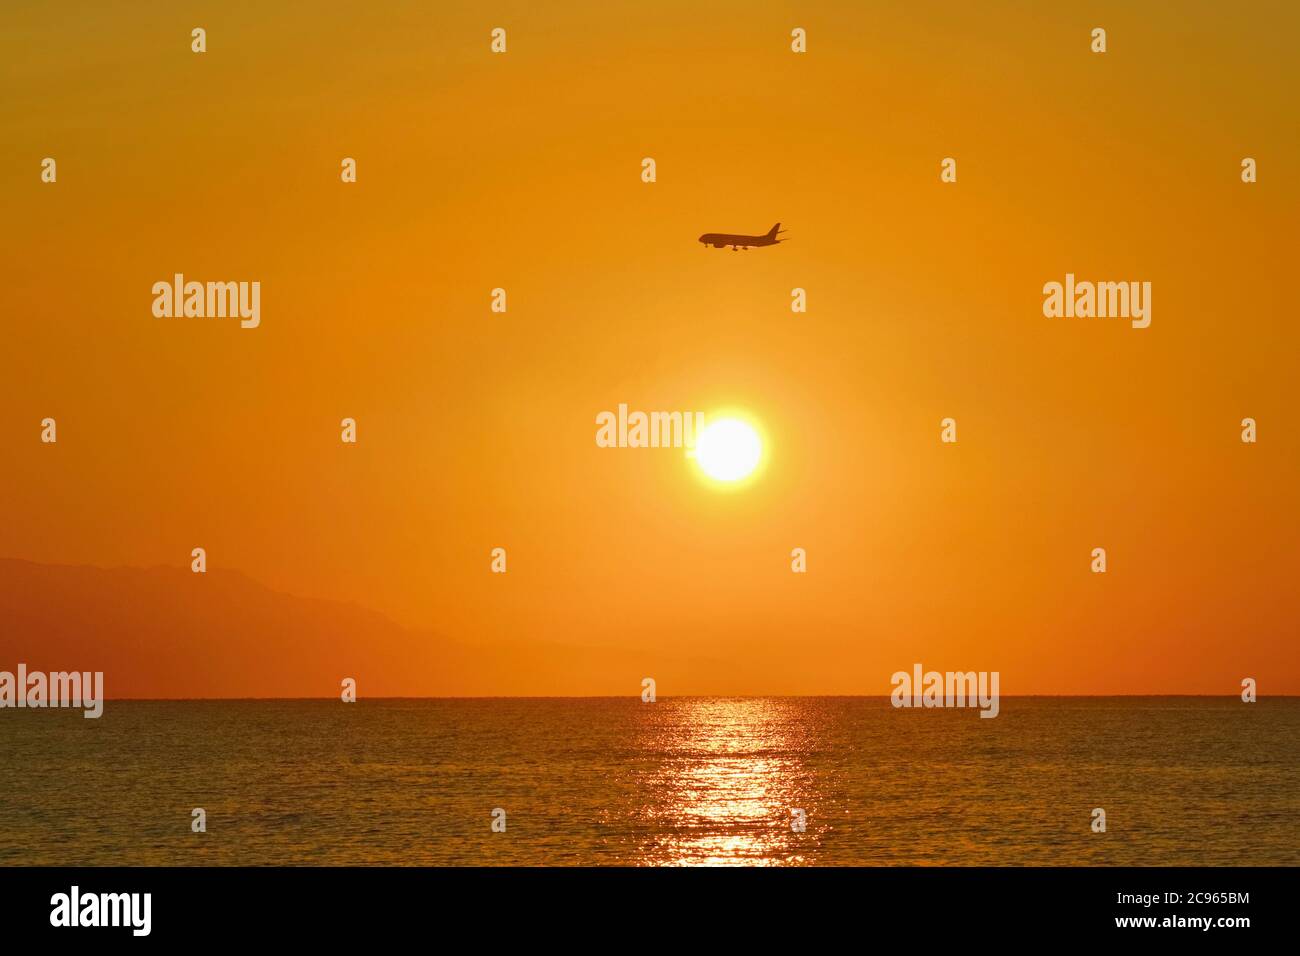 Sunrise over the sea. Aeroplane coming in to land. Stock Photo